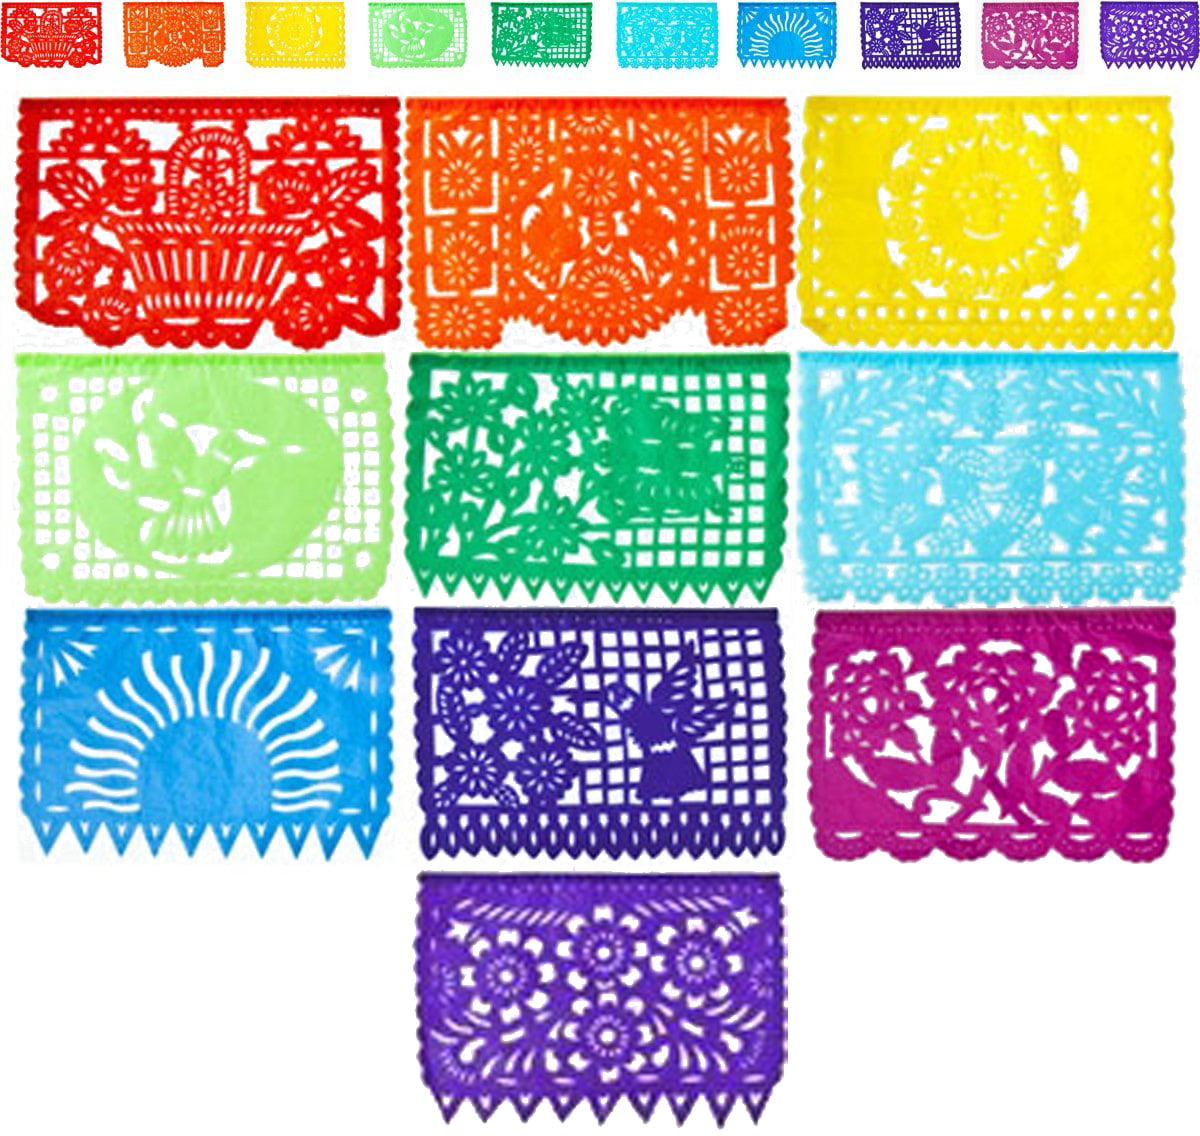 Multicolored Papel Picado Banderitas Fiesta Decorations Pack of 12 Mexican Paper Flags Made in Mexico